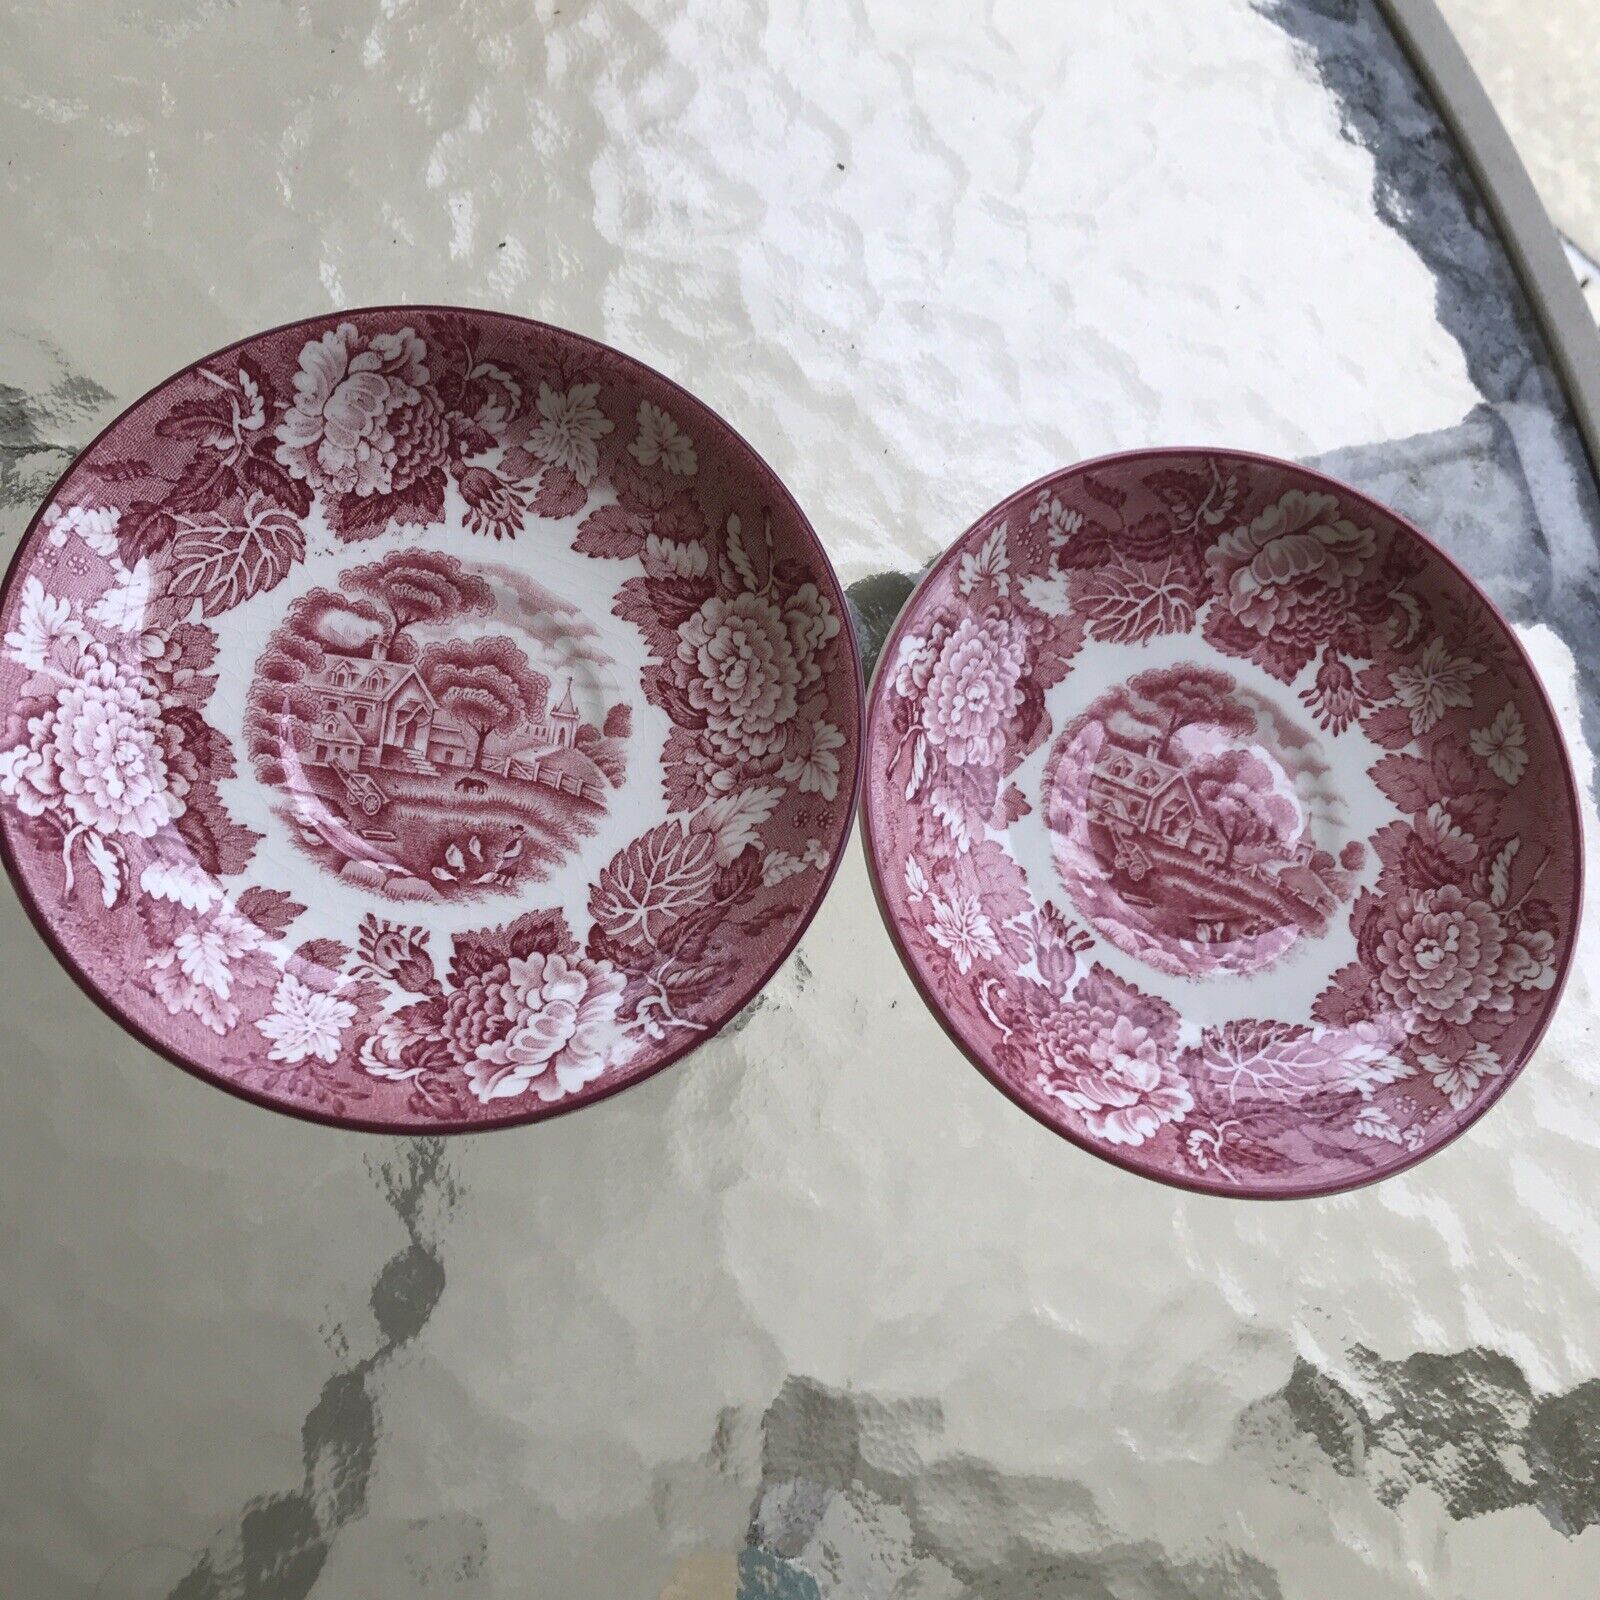 Vintage Enoch Woods Sons English Scenery Pink Red Transferware saucer Plates 2